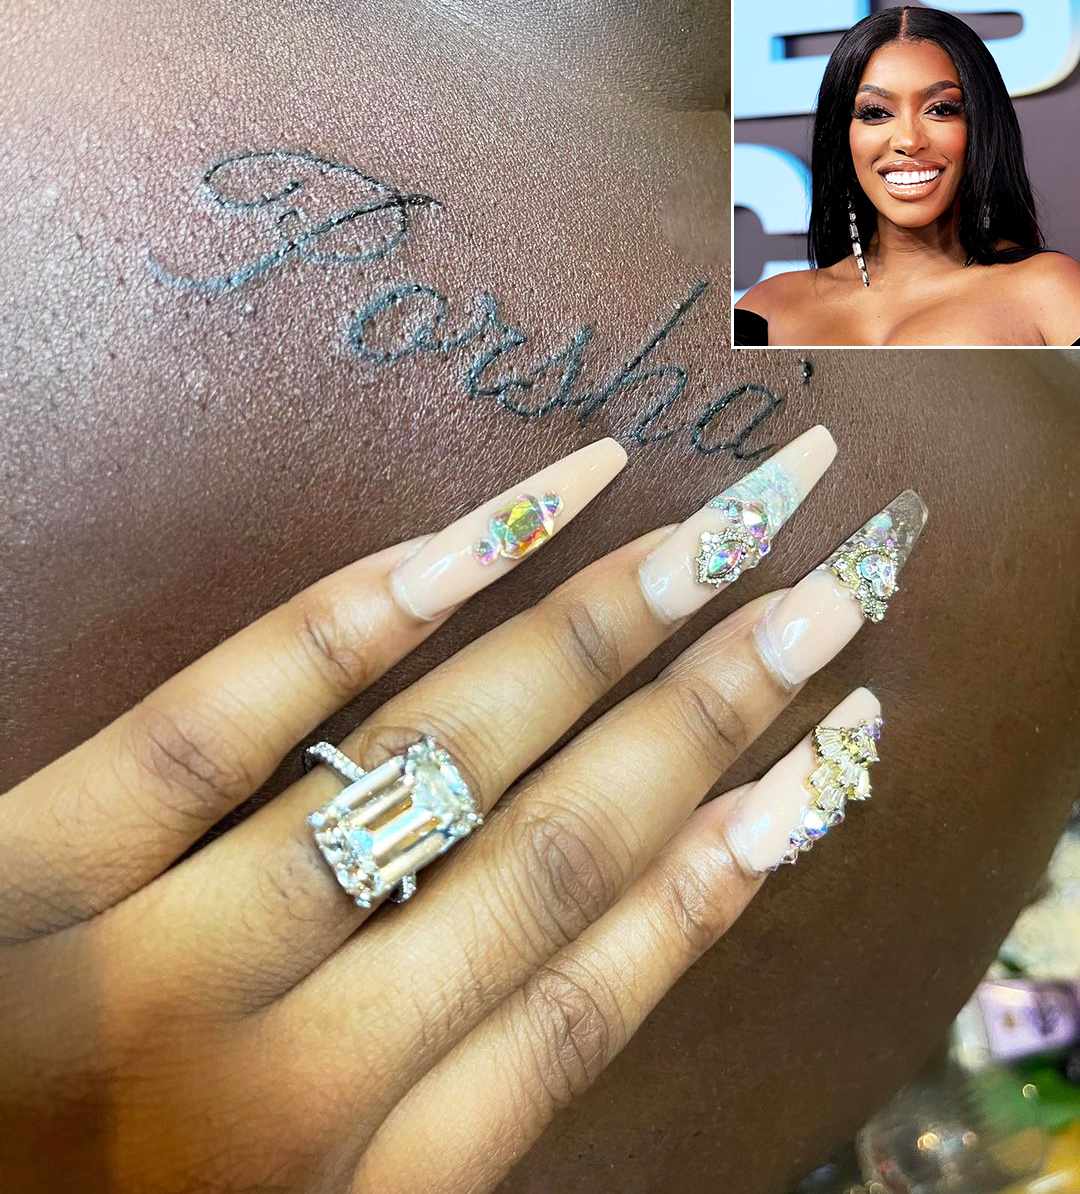 Porsha Williams Shows Off Fiance's 'Very First Tattoo' of Her Name